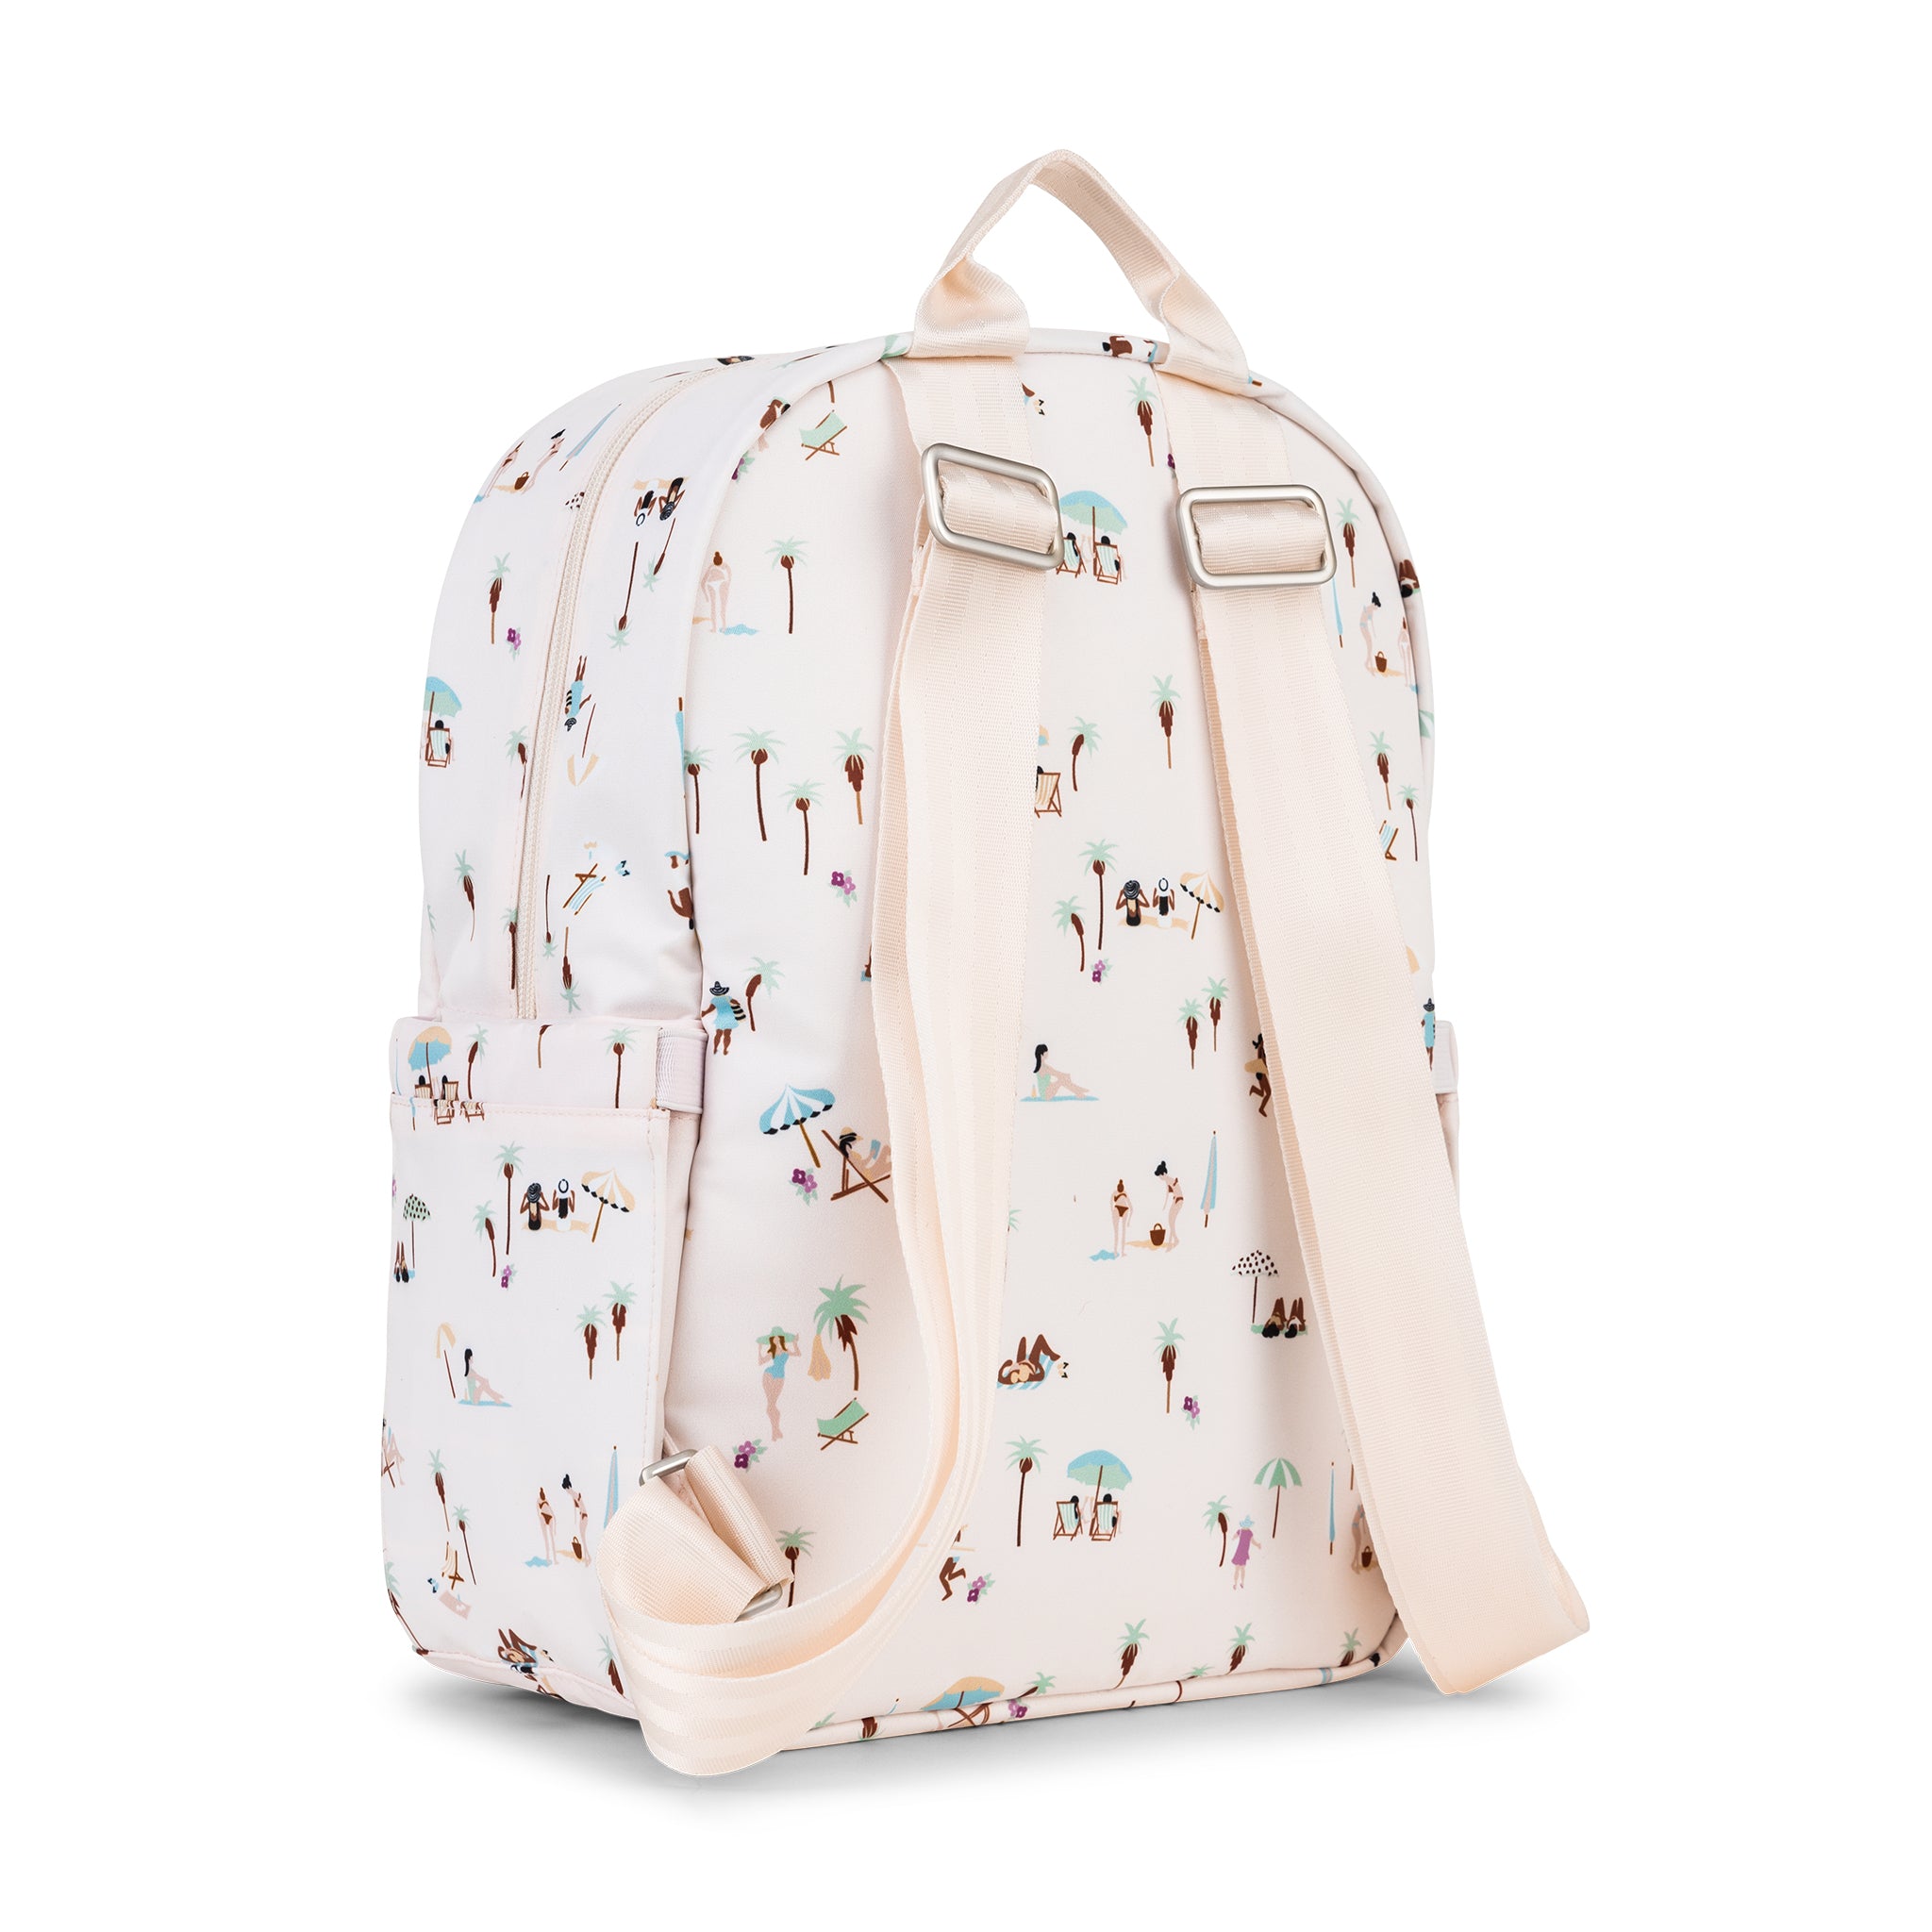 Multicolor sunbathers, surfers, palm trees and beach umbrellas on pale blush background Midi Backpack Three Quarter Angle Back View